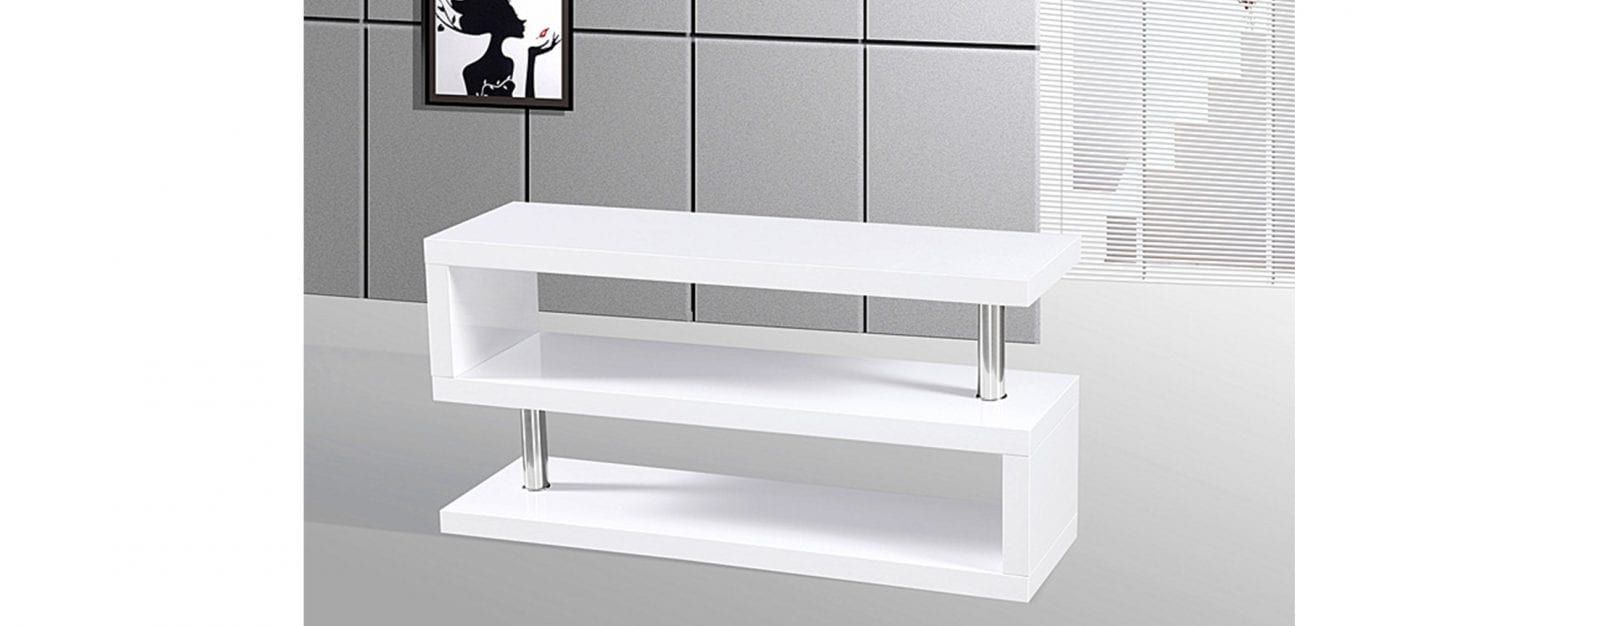 Charisma Tv Stand In White High Gloss | Allans Furniture Regarding Charisma Tv Stands (Gallery 20 of 20)